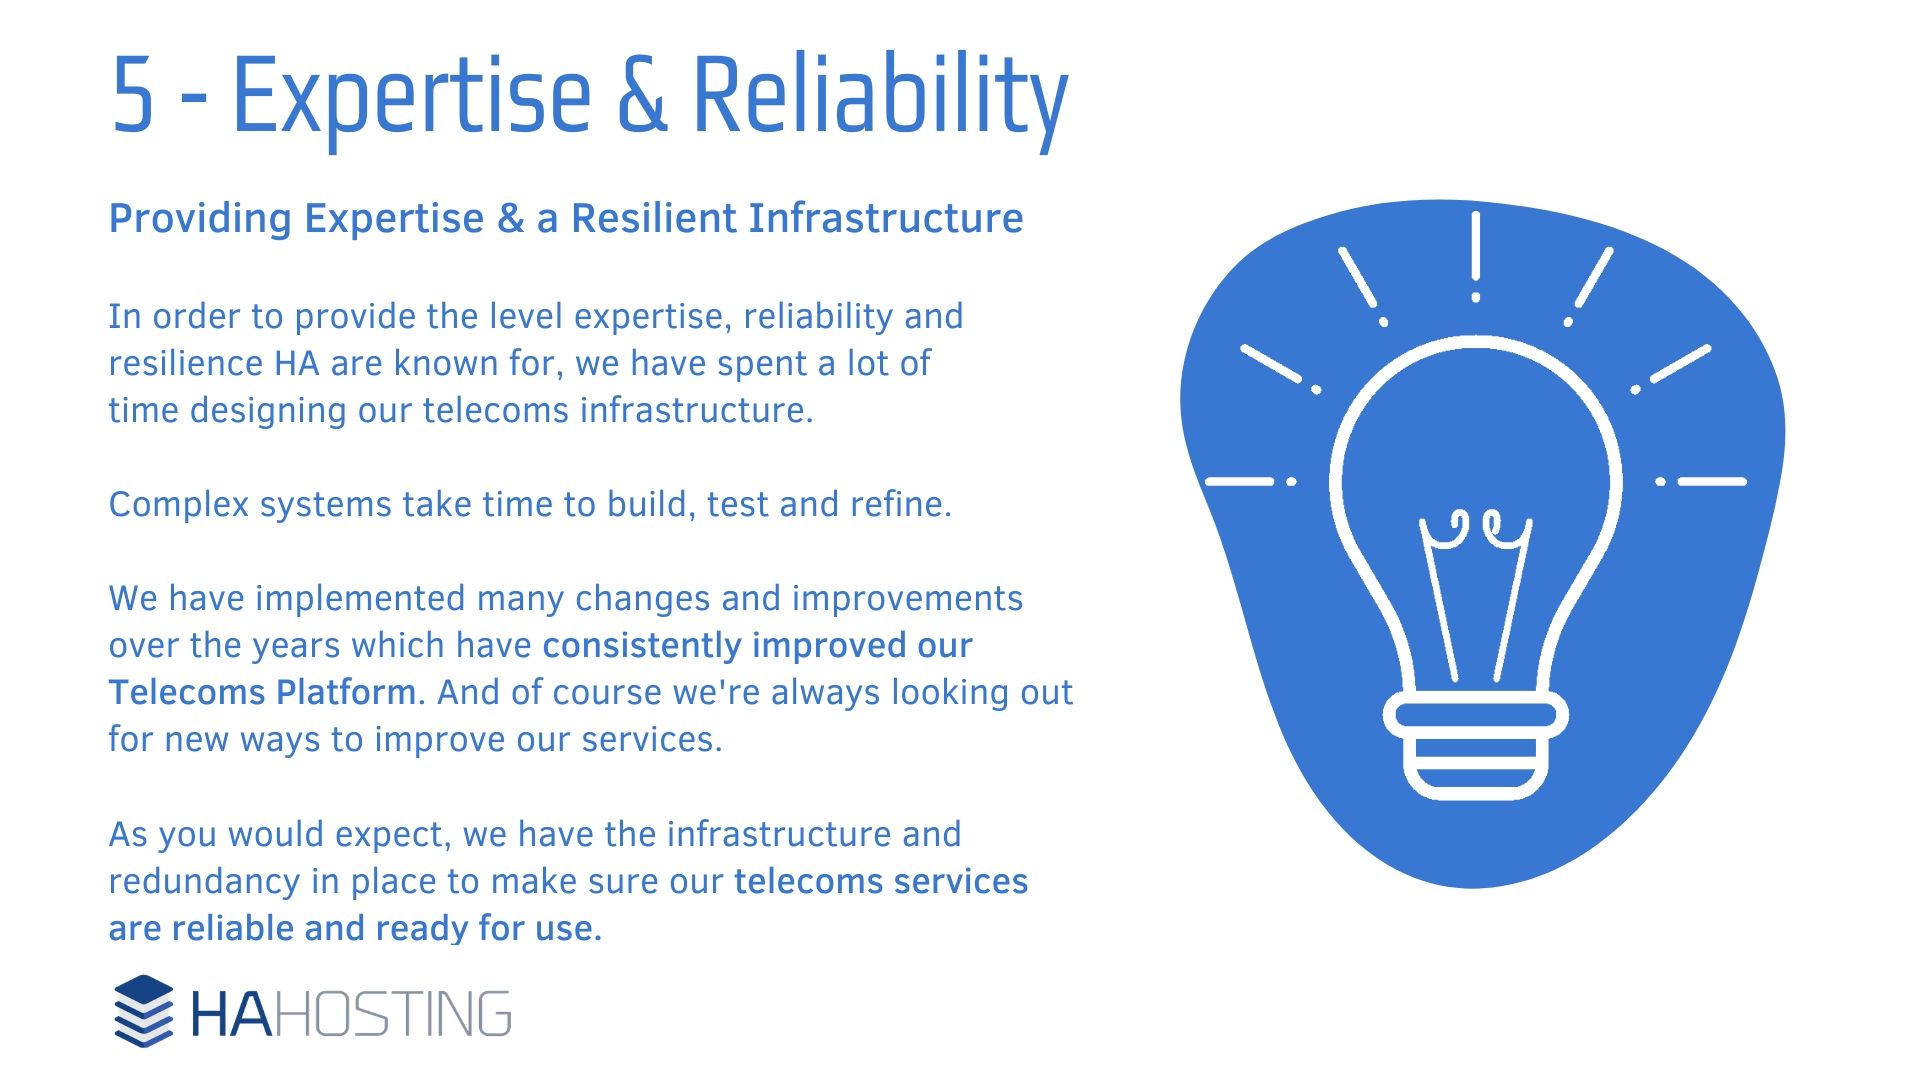 Expertise and Reliability - Providing Expertise & a Resilient Infrastructure In order to provide the level expertise, reliability and resilience HA are known for, we have spent a lot of time designing our telecoms infrastructure. Complex systems take time to build, test and refine. We have implemented many changes and improvements over the years which have consistently improved our Telecoms Platform. And of course we're always looking out for new ways to improve our services. As you would expect, we have the infrastructure and redundancy in place to make sure our telecoms services are reliable and ready for use.